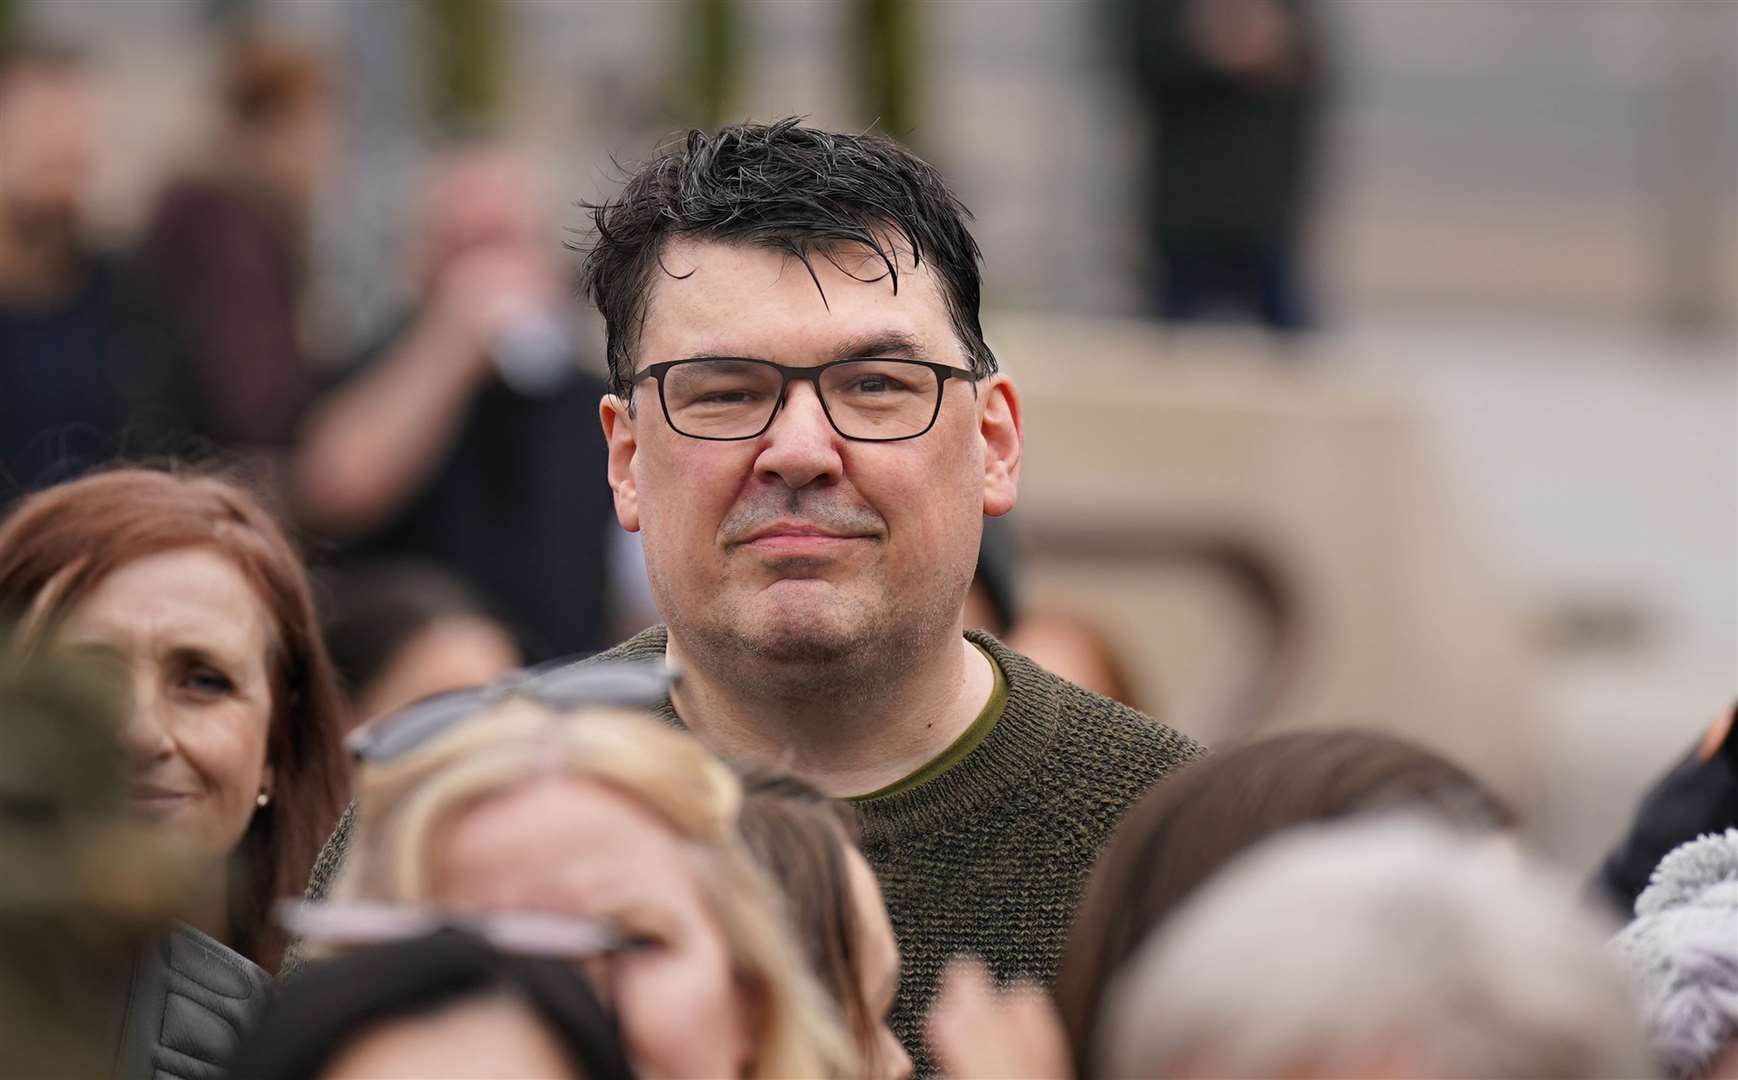 Father Ted creator Graham Linehan attended the Let Women Speak rally in Belfast (Niall Carson/PA)